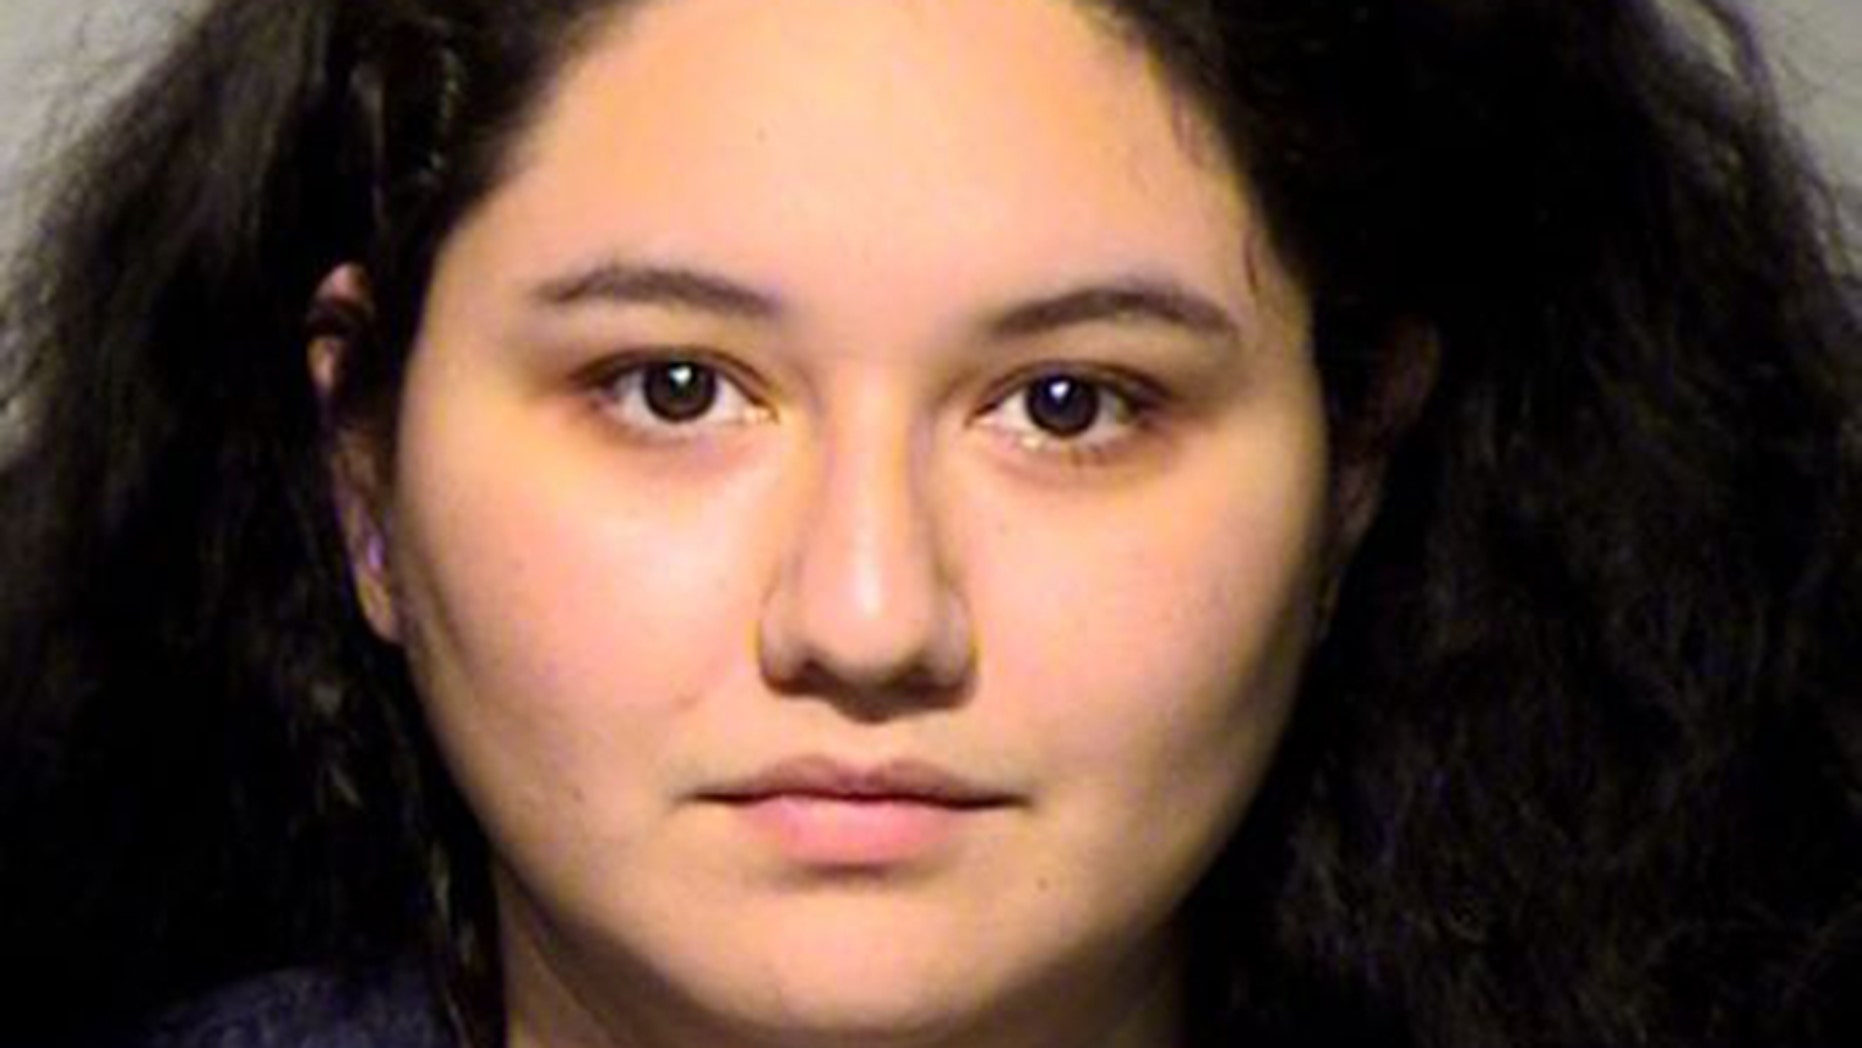 Katherine R. Gonzalez was sentenced Thursday for having sexual contact with an 11-year-old student.